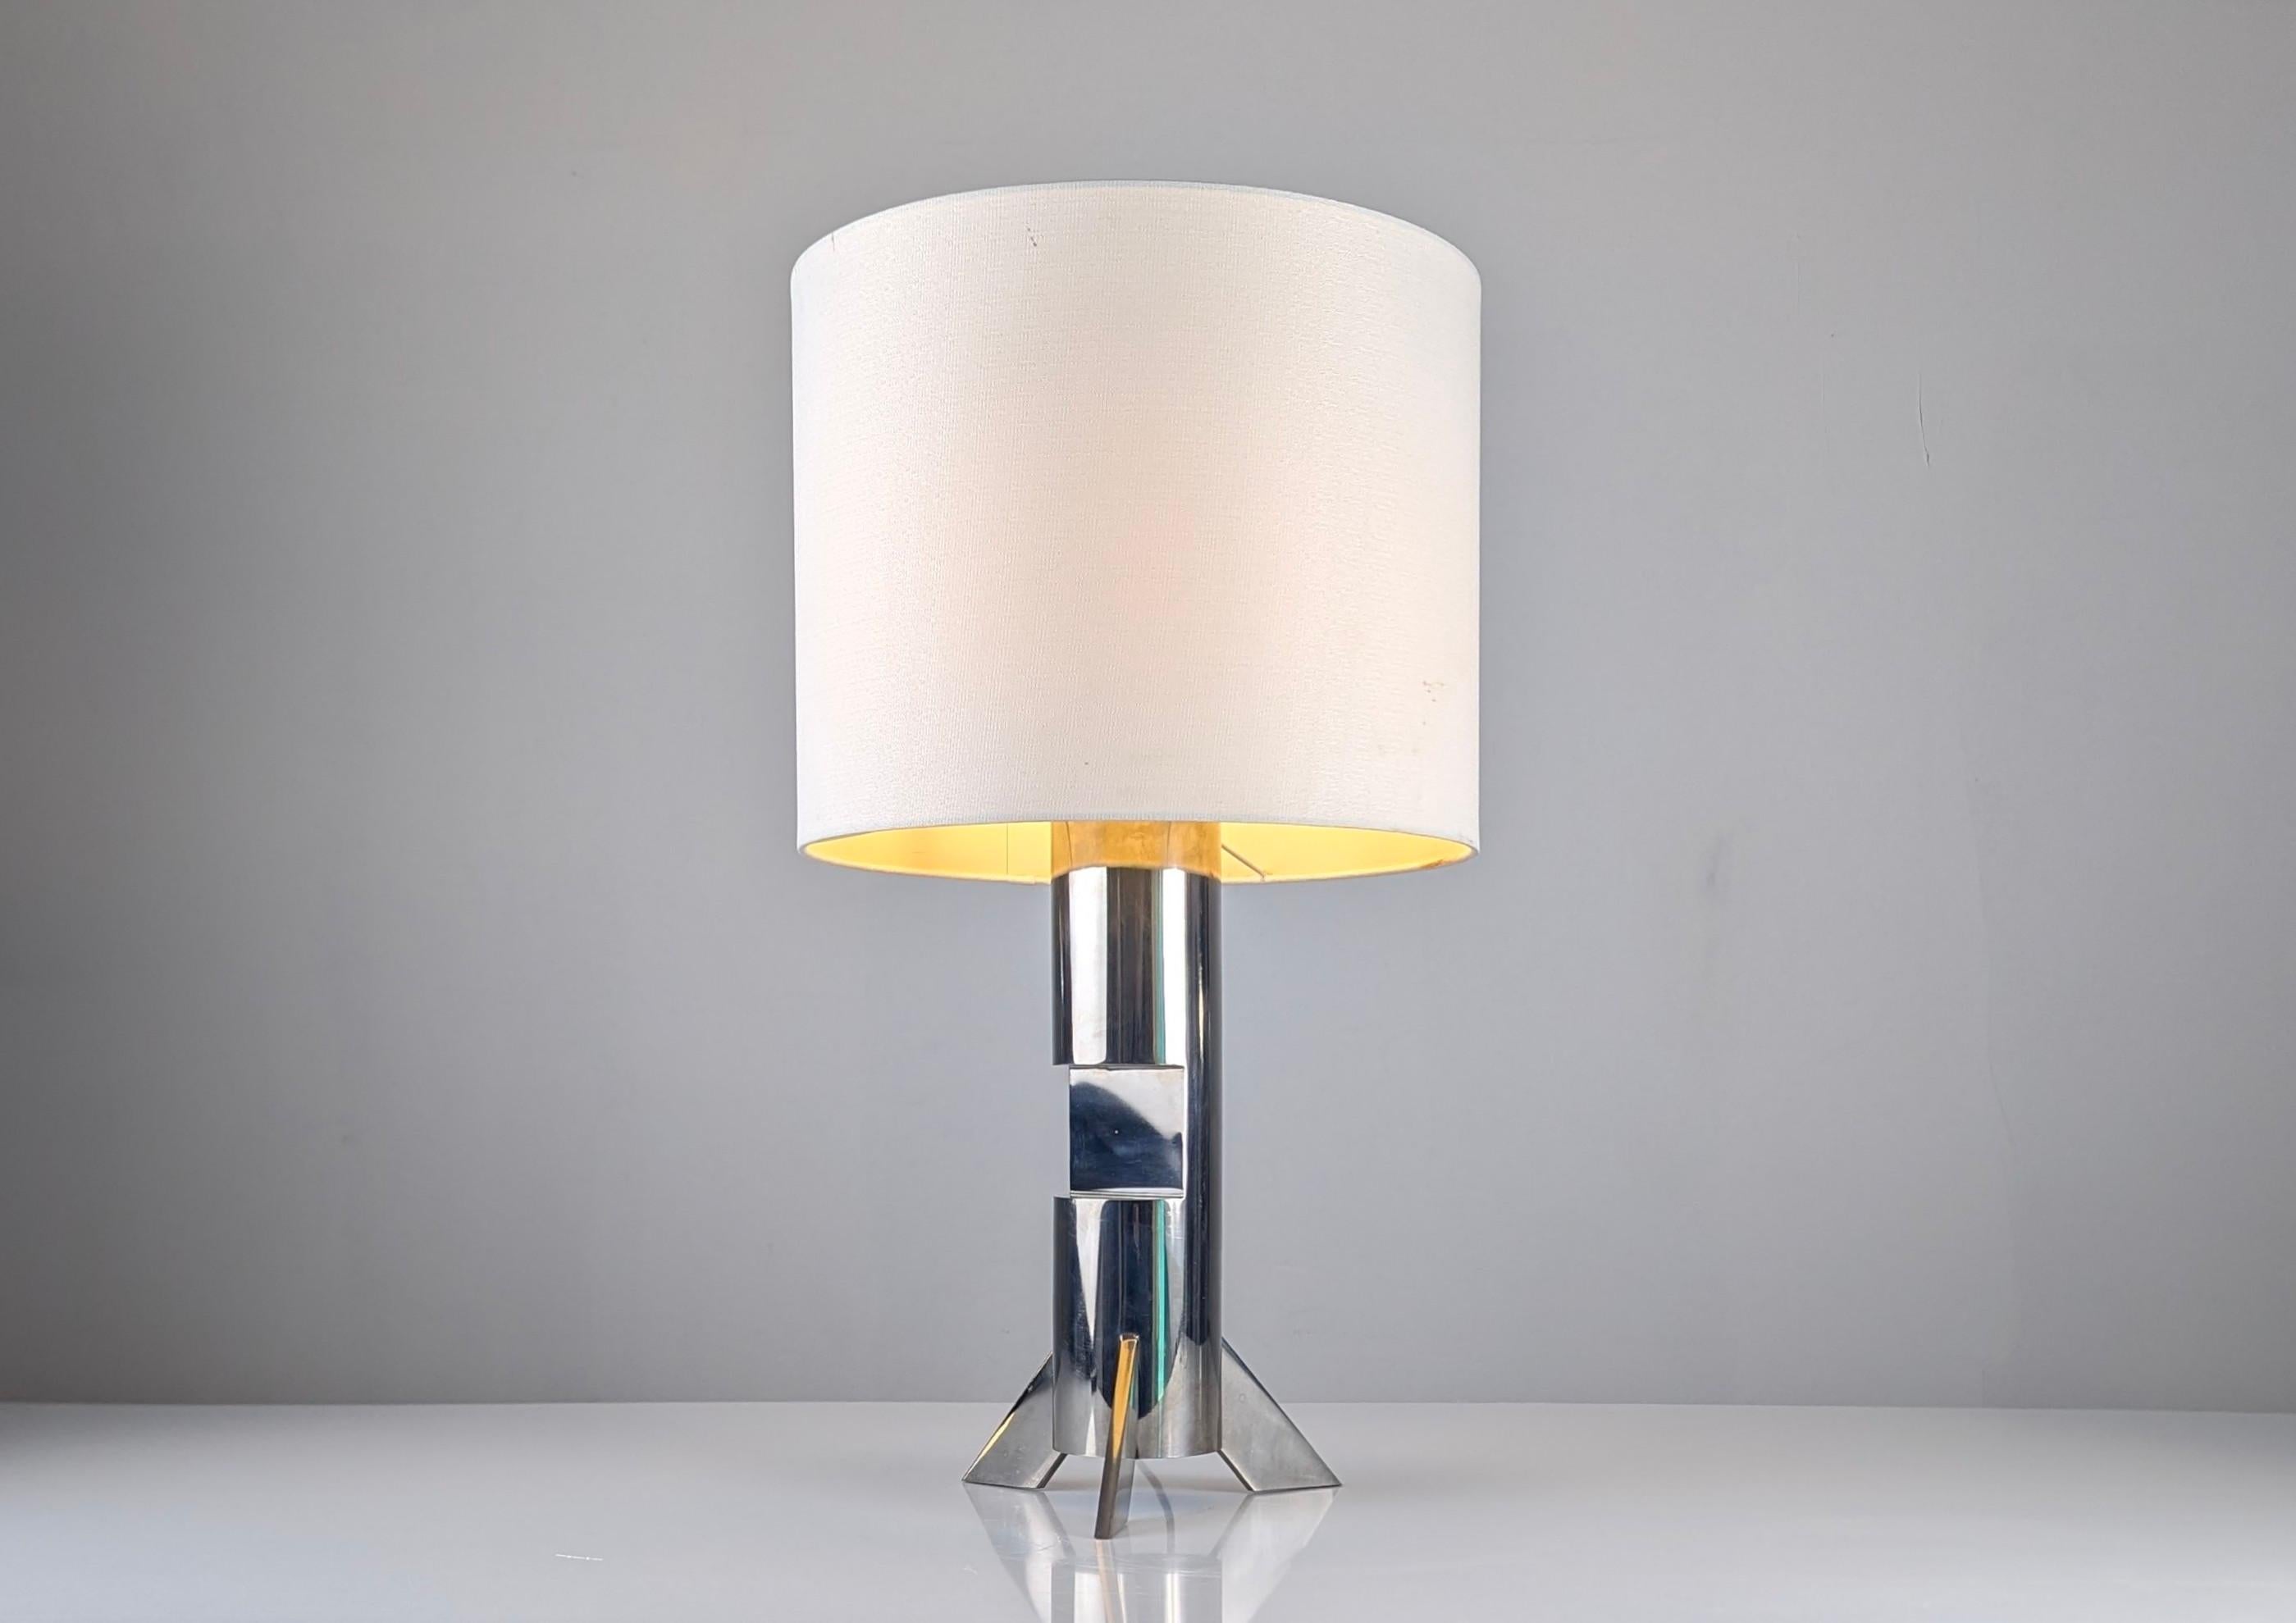 Design cylindrical steel sculpture lamp with clean and elegant lines.

Dimensions: 43 x 26 x 22 cm